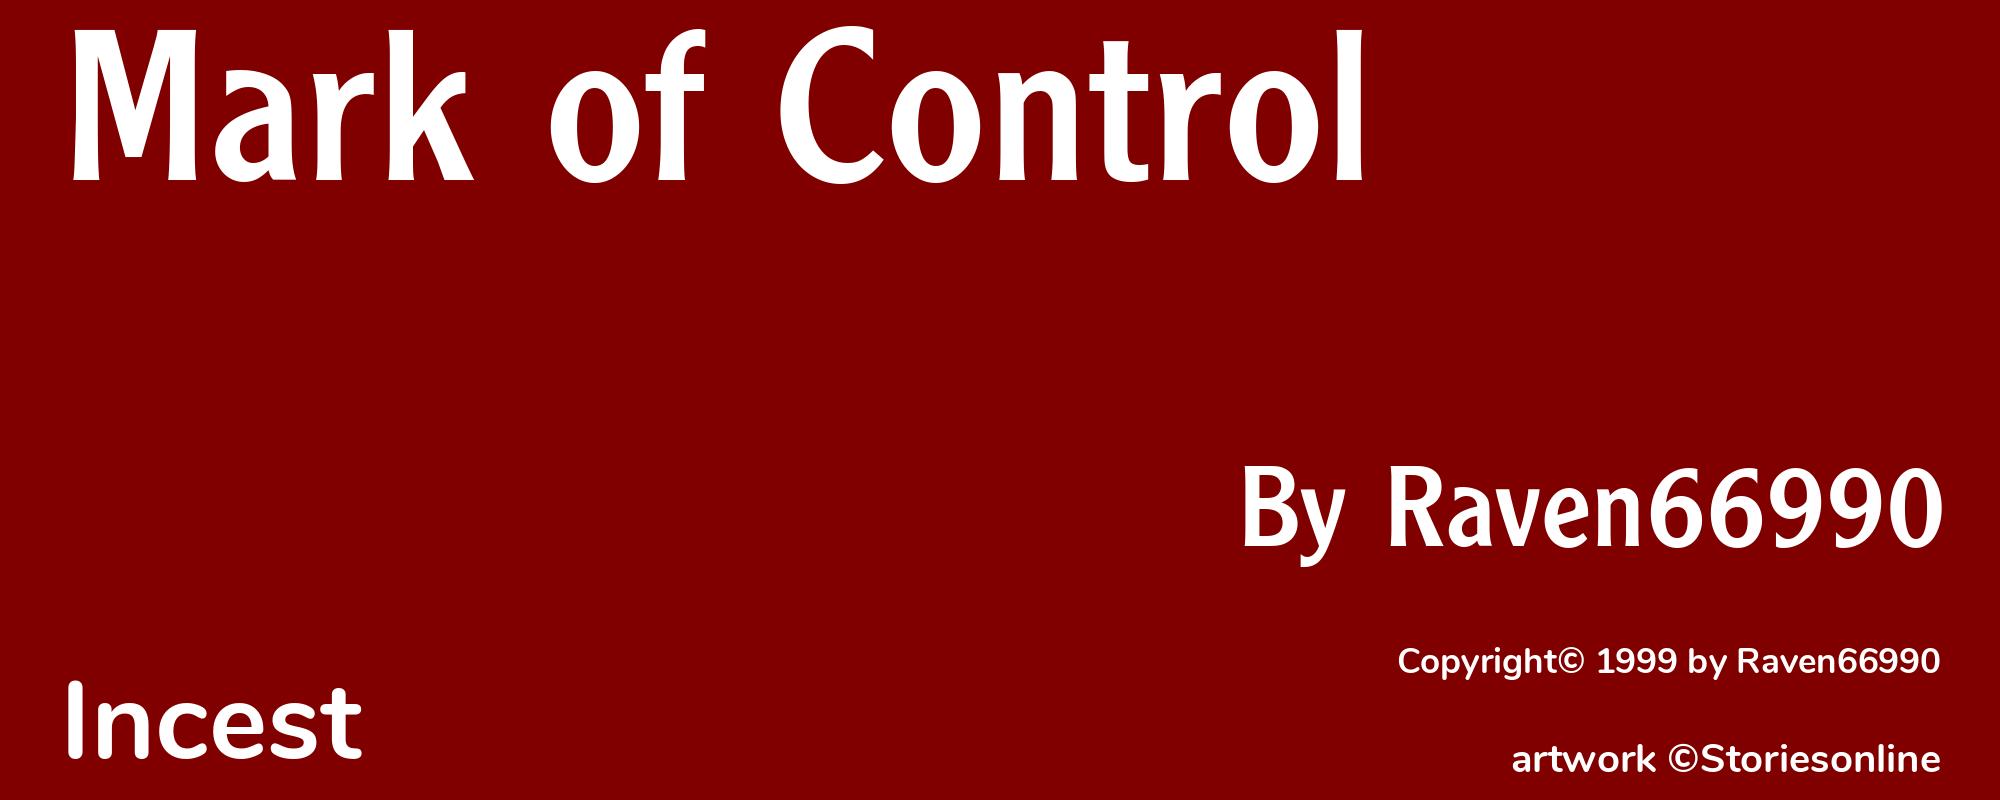 Mark of Control - Cover